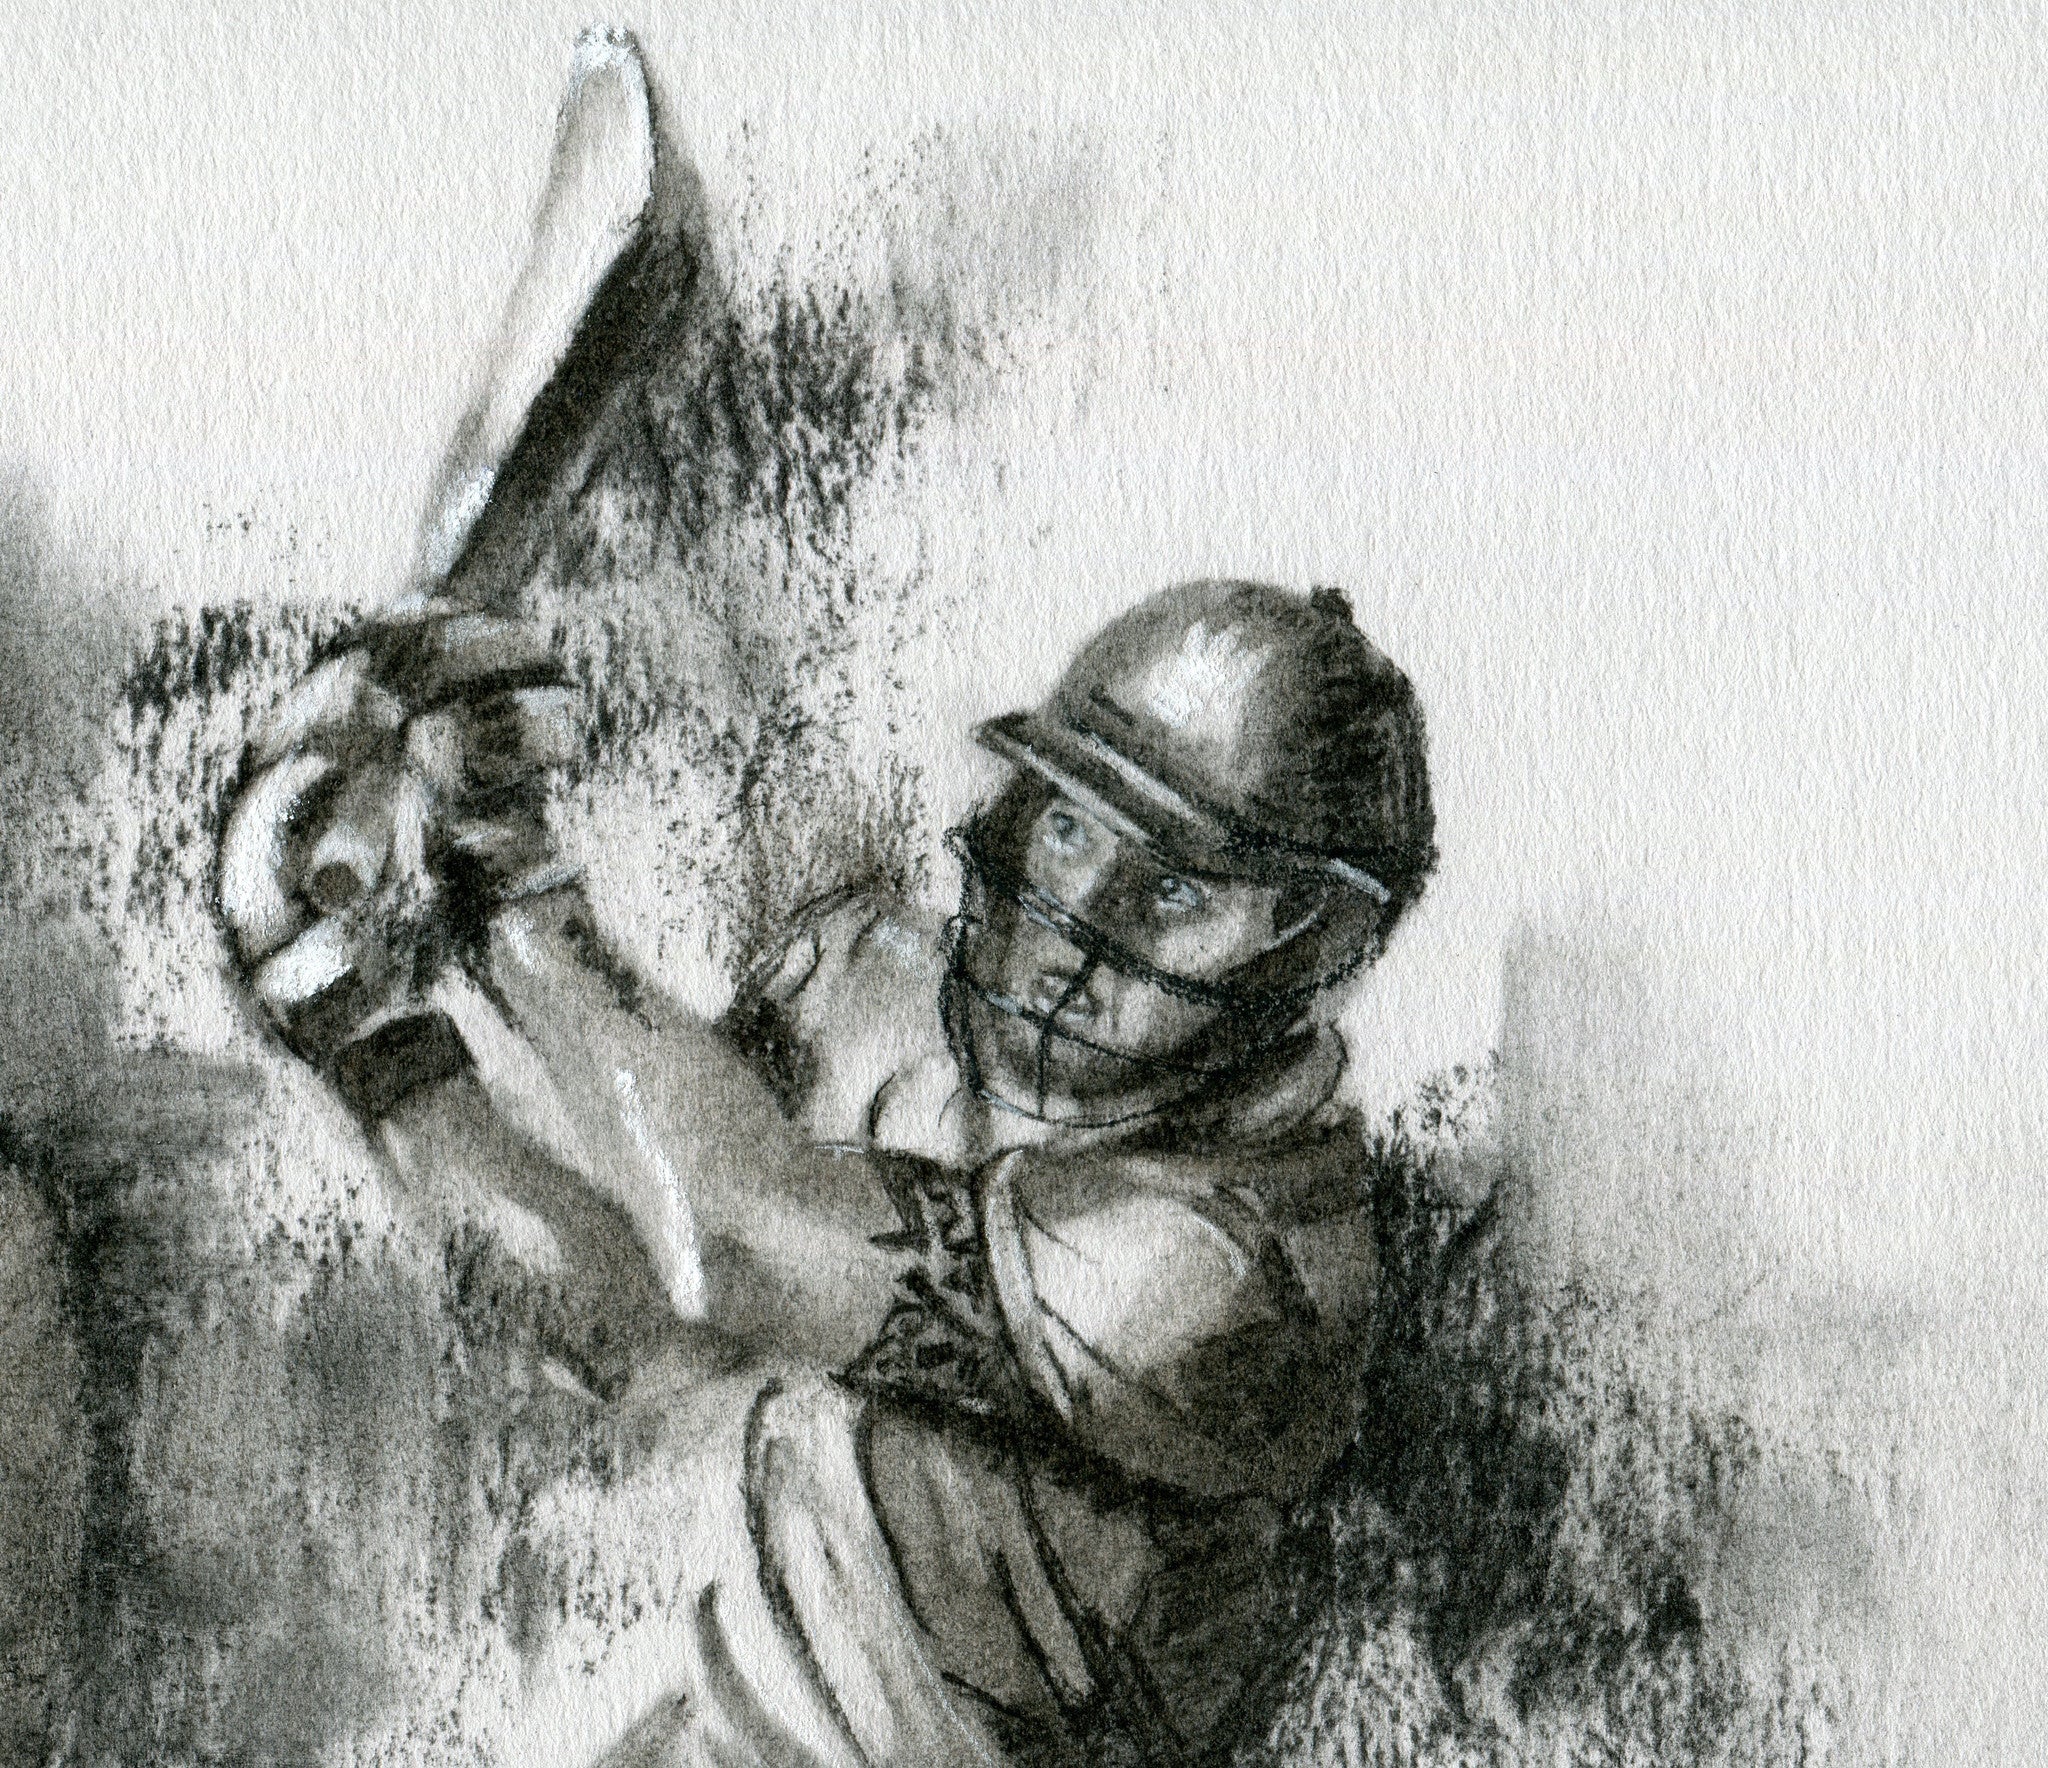 close up detail of batsman hitting a six in a t20 match drawn in charcoal by cricket artist